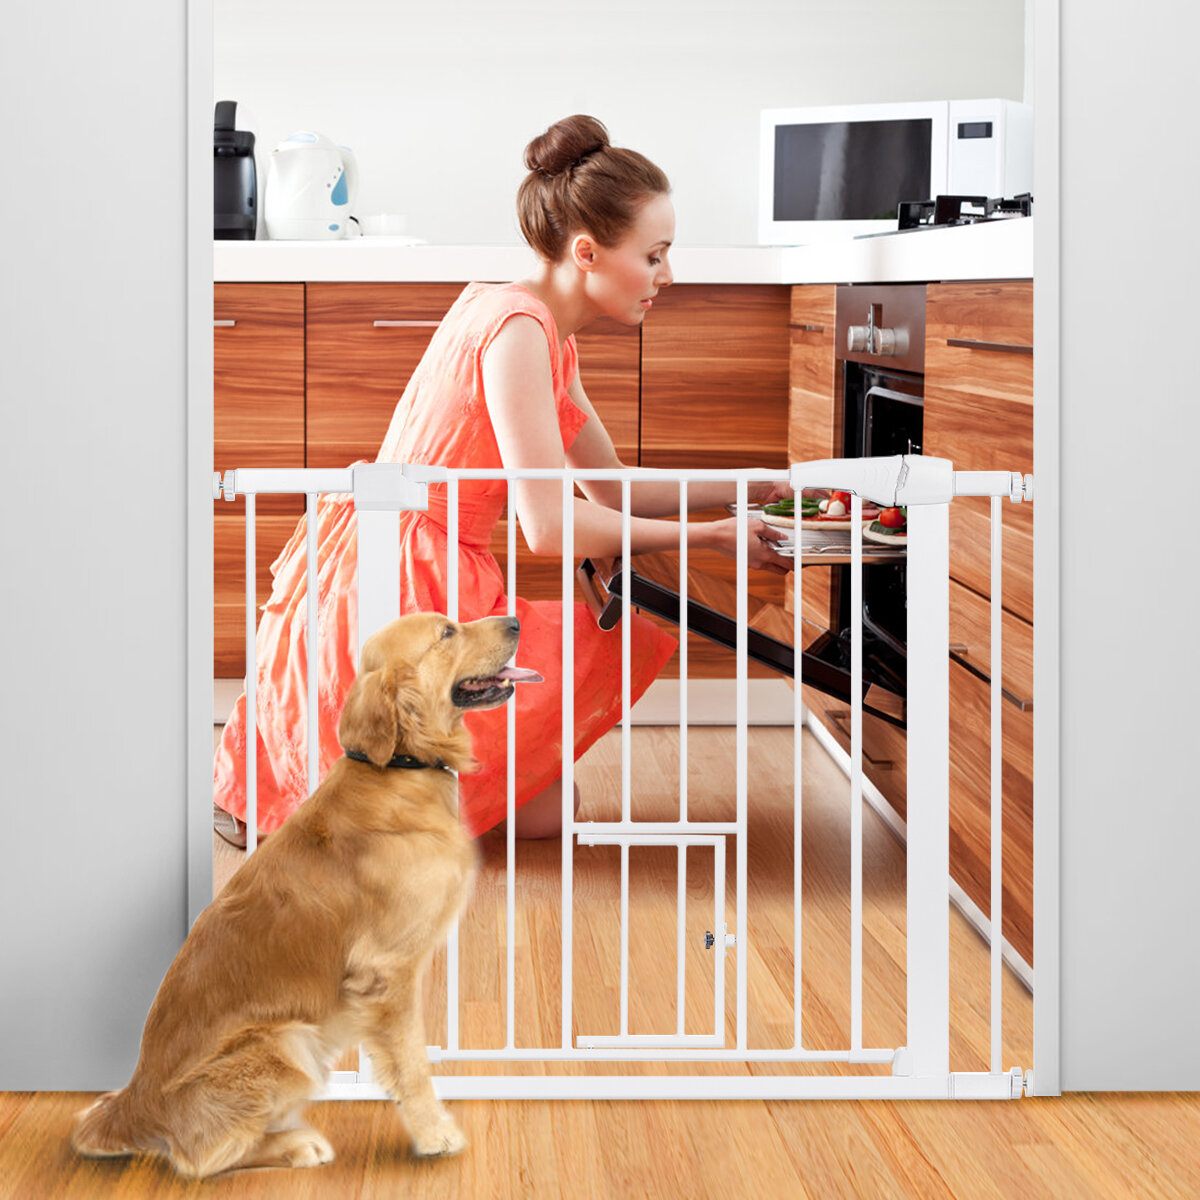 Image of Comomy Extra Wide Pet Gate for Dog Cat Animal Baby Gate Fence Pens with Swing Door Kids Play Gate 30" Tall Doggie Gate